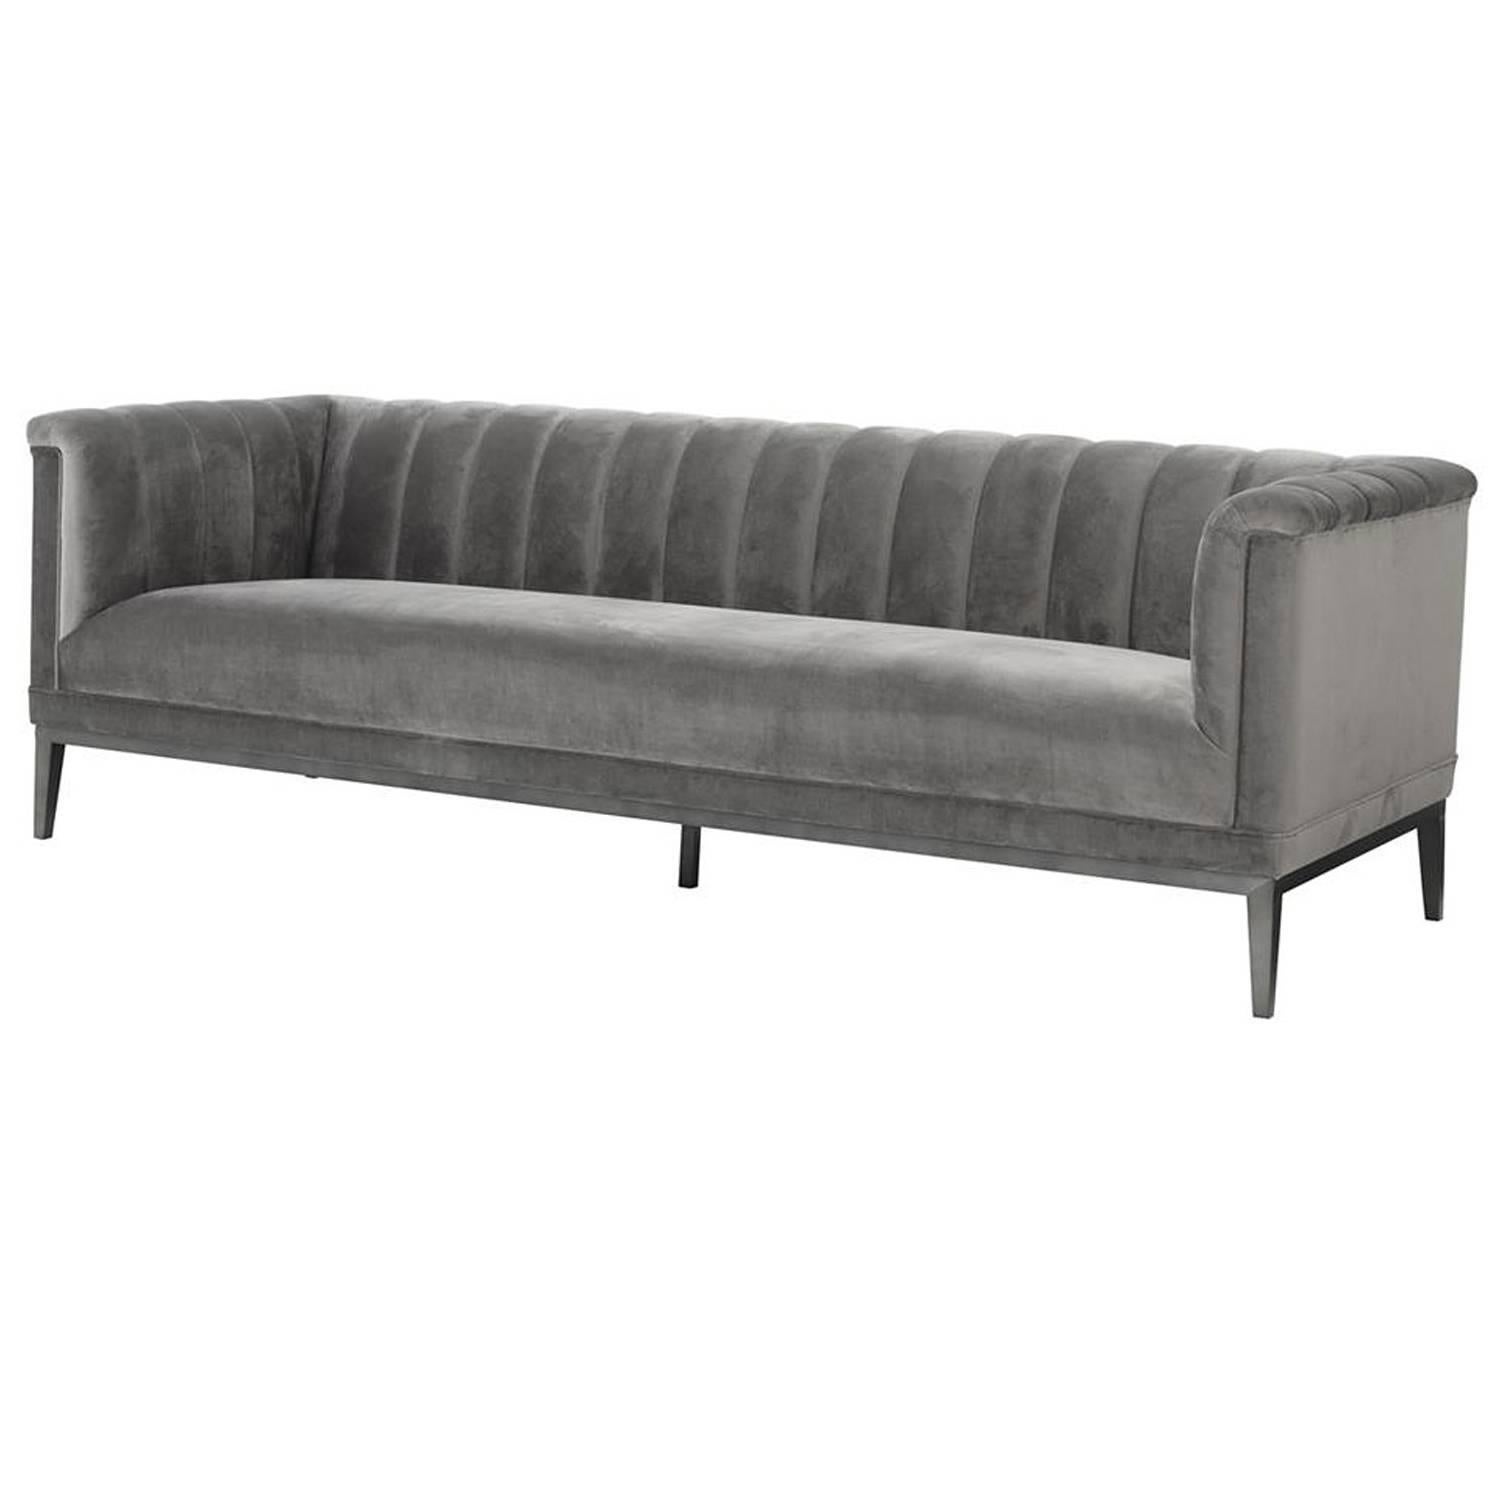 Stepper Sofa with Porpoise Grey Fabric